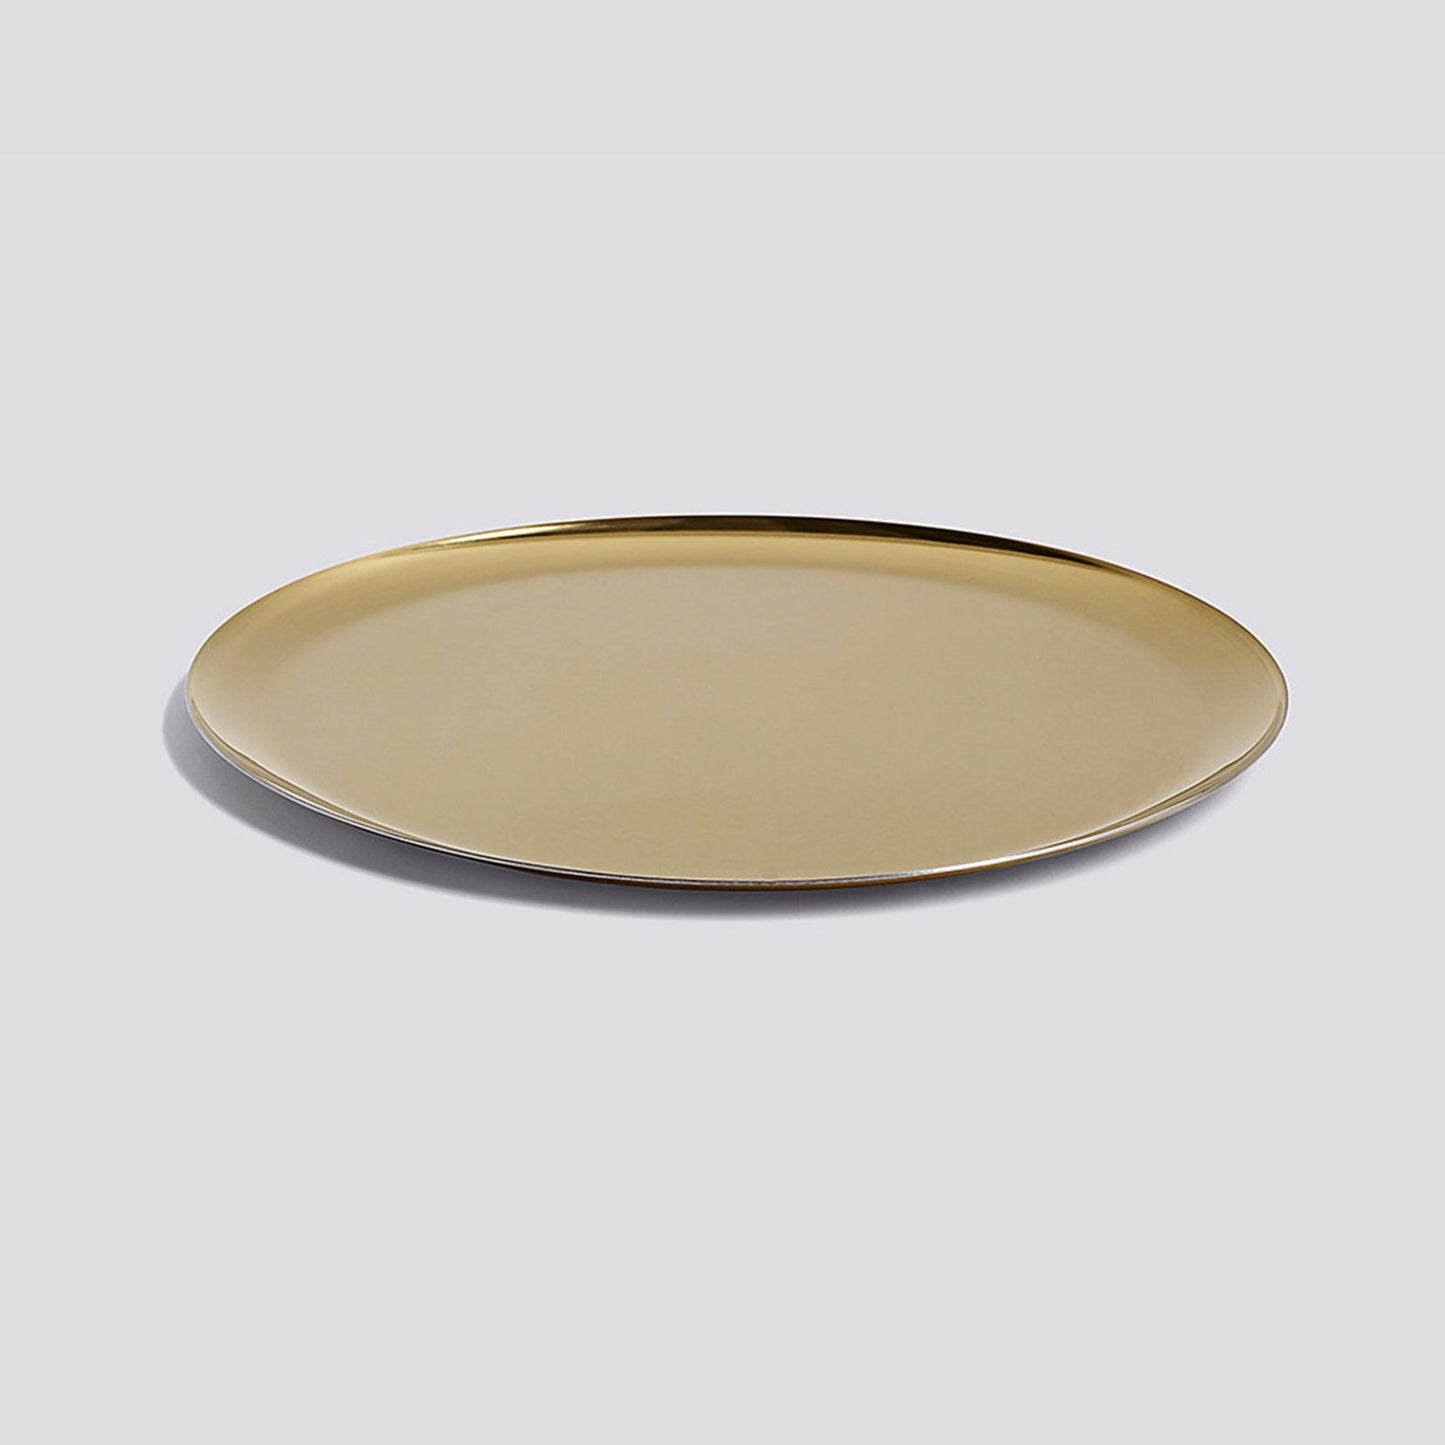 Serving Tray - Gold